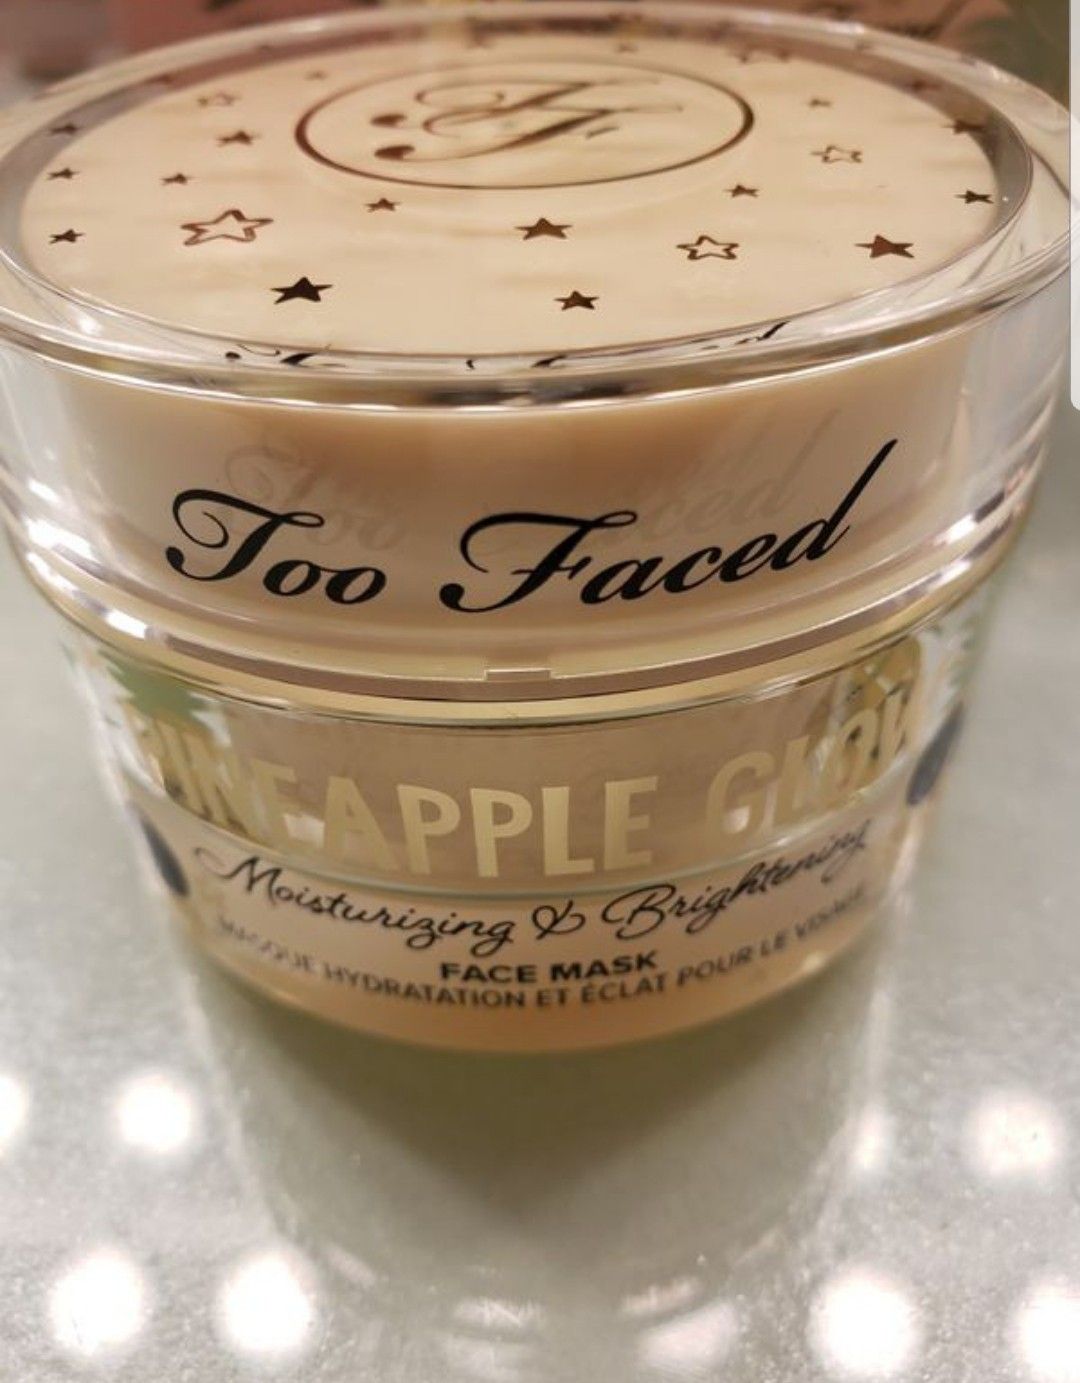 Too Faced Face Mask